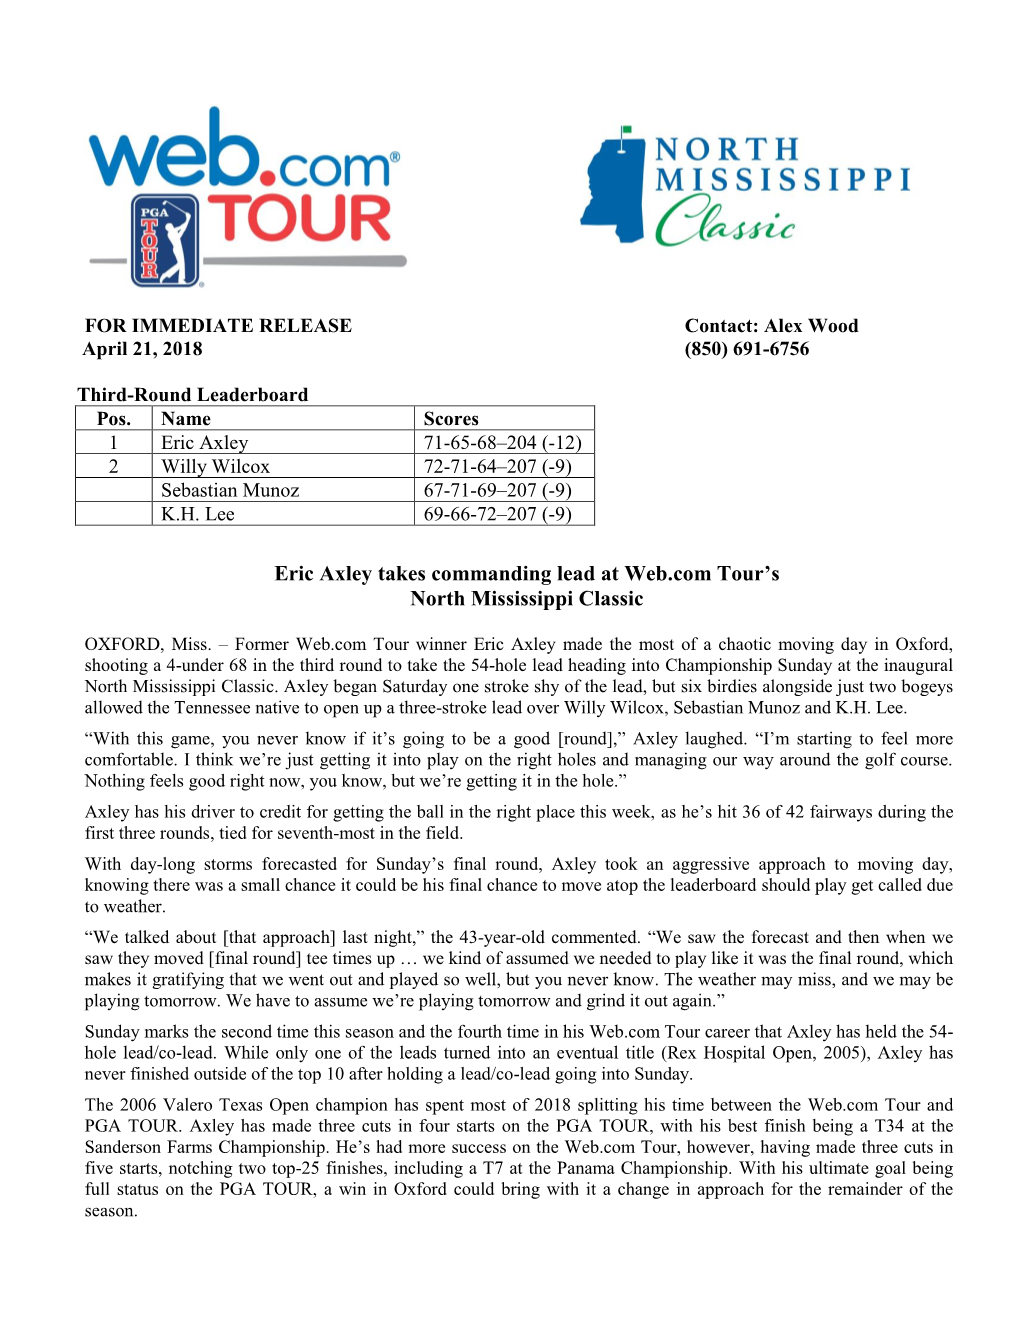 Eric Axley Takes Commanding Lead at Web.Com Tour's North Mississippi